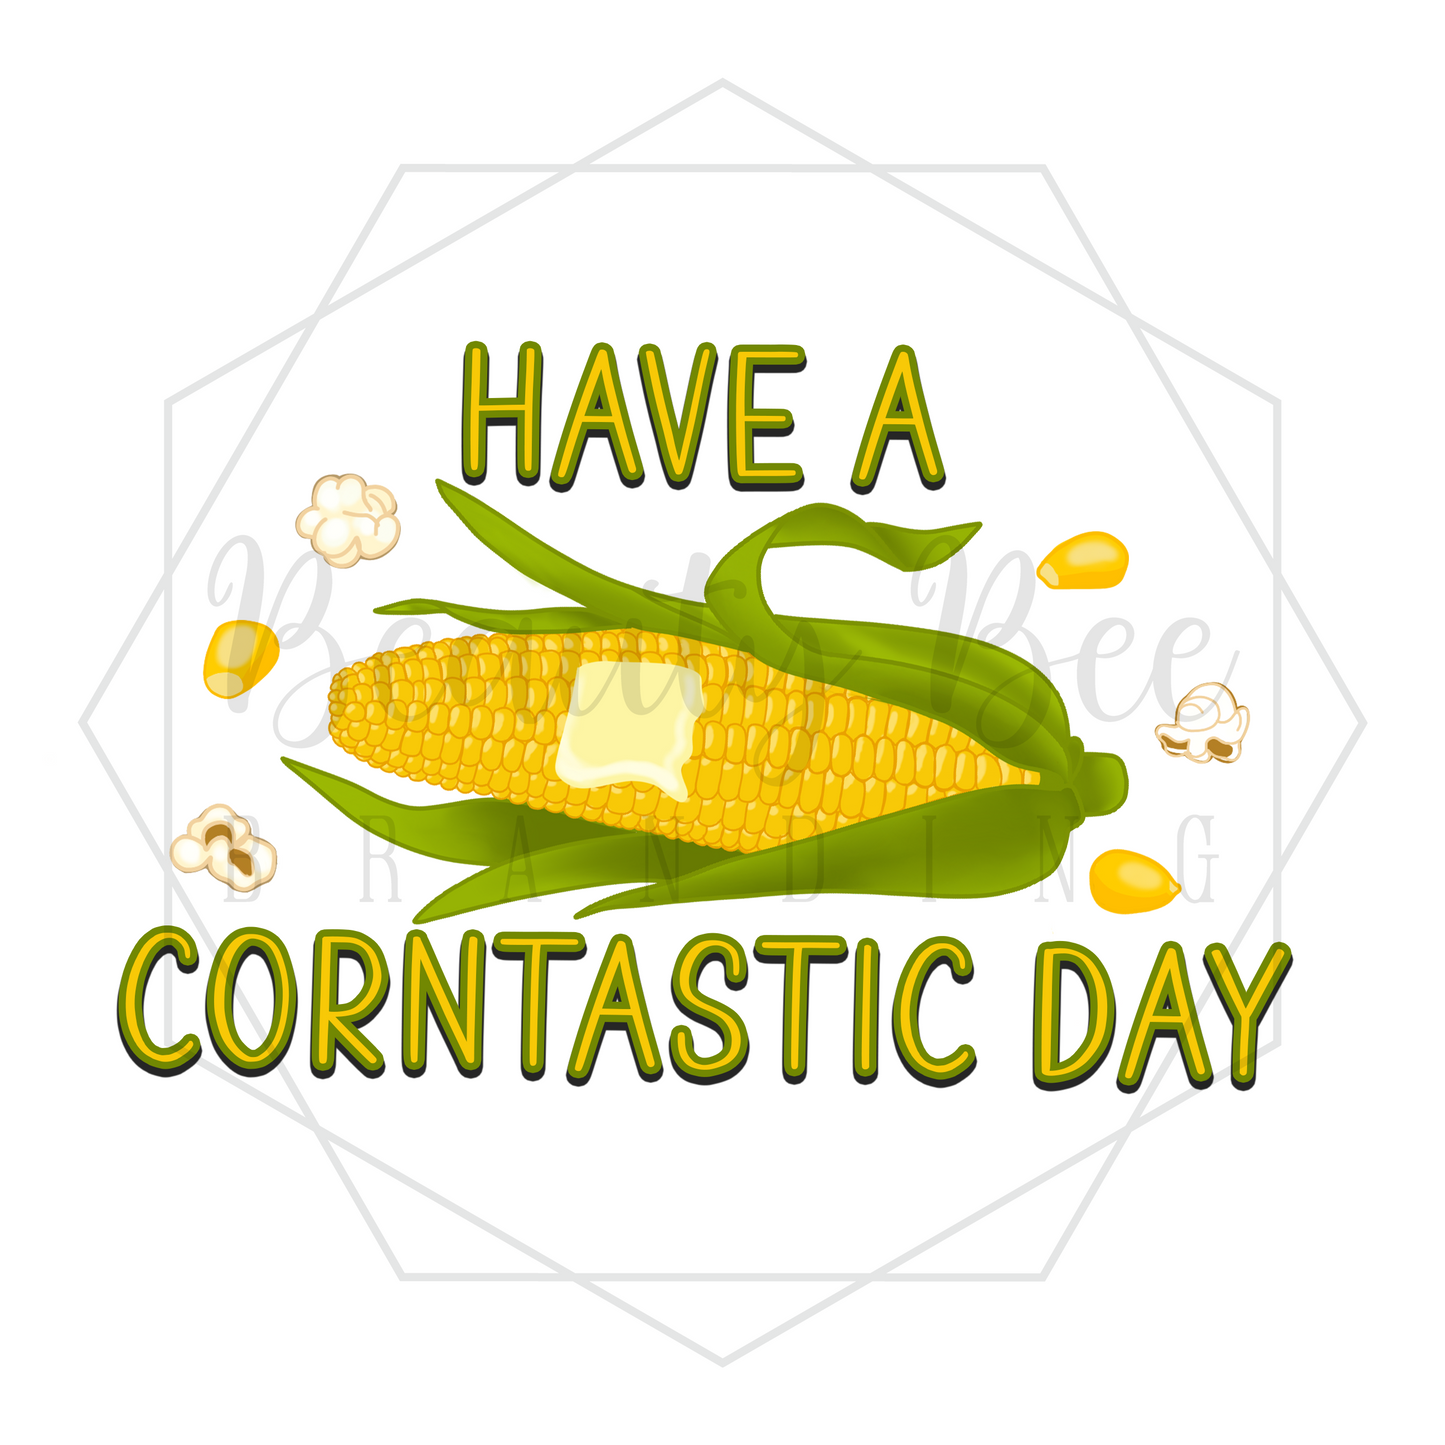 Have a Corntastic Day V2 DIGITAL DECAL - Sublimation and Print & Cut Files